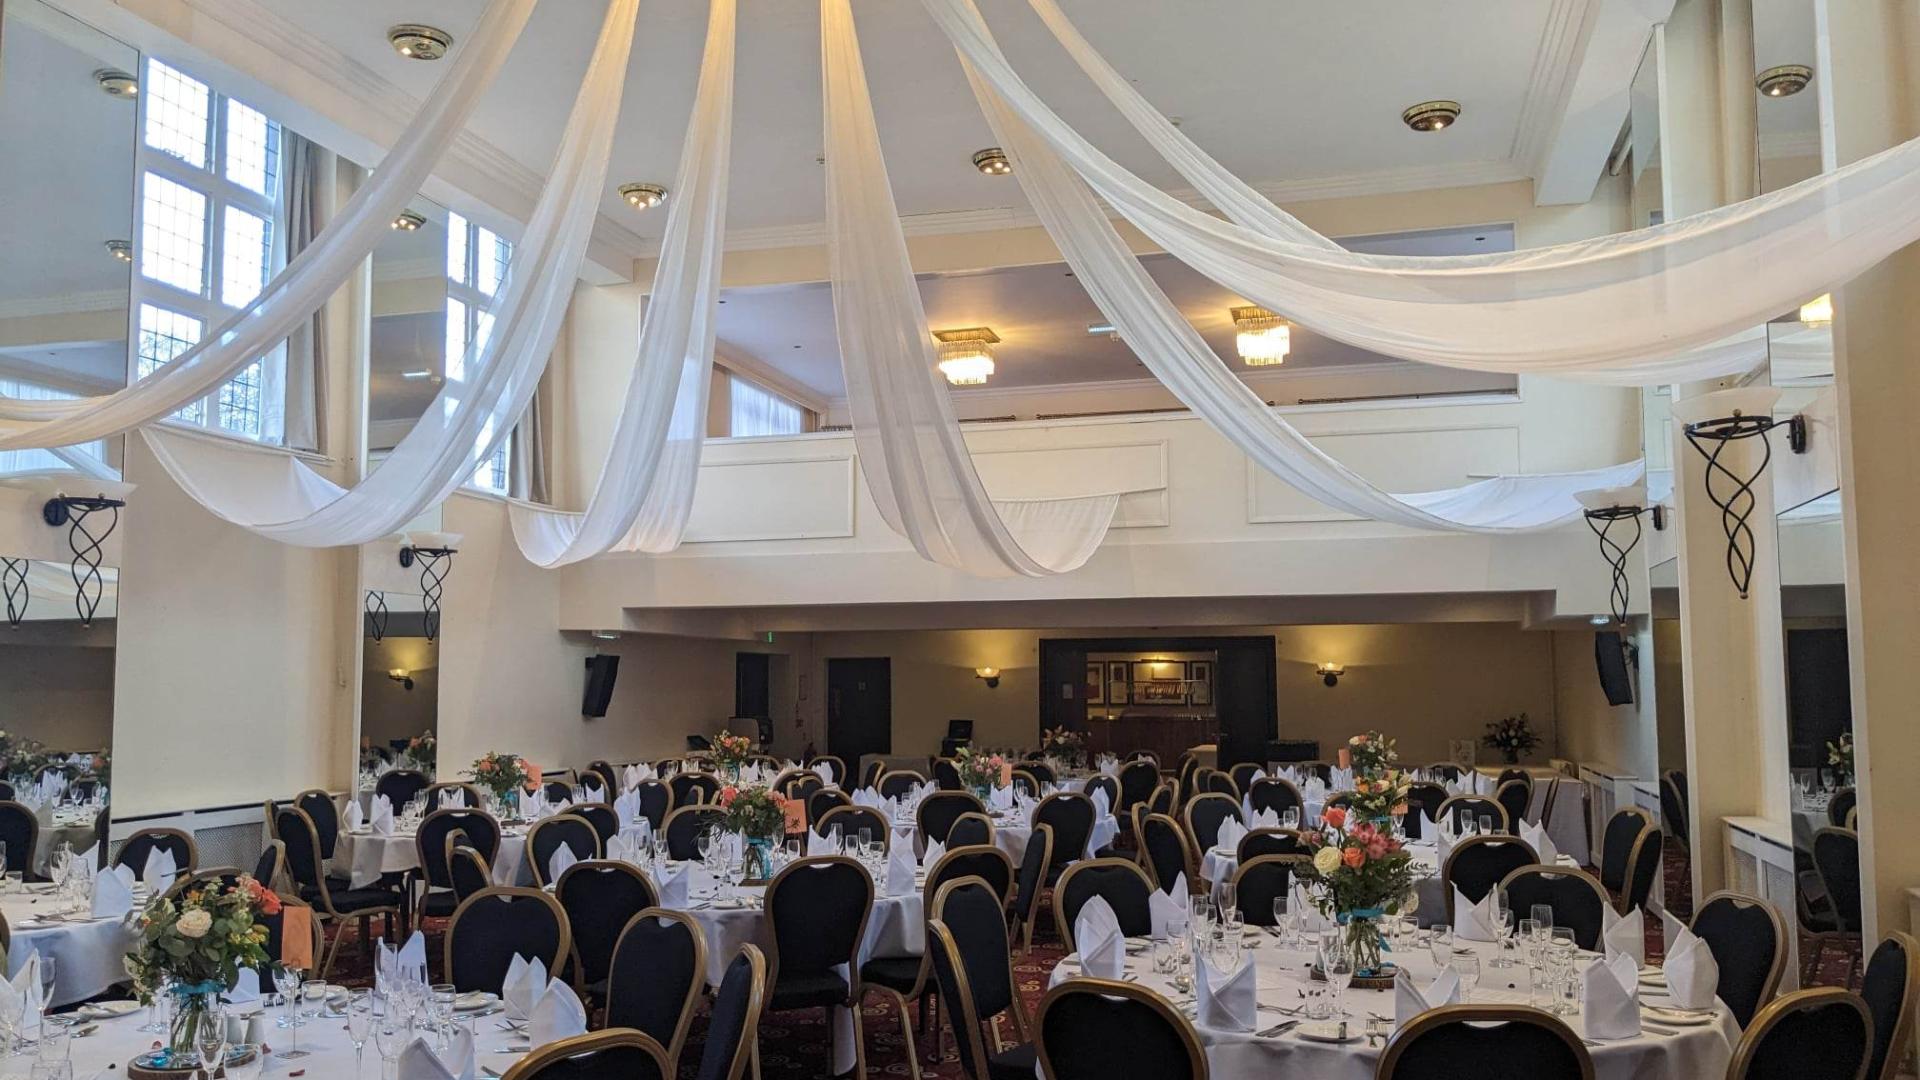 Ballrooms for Hire in Leeds